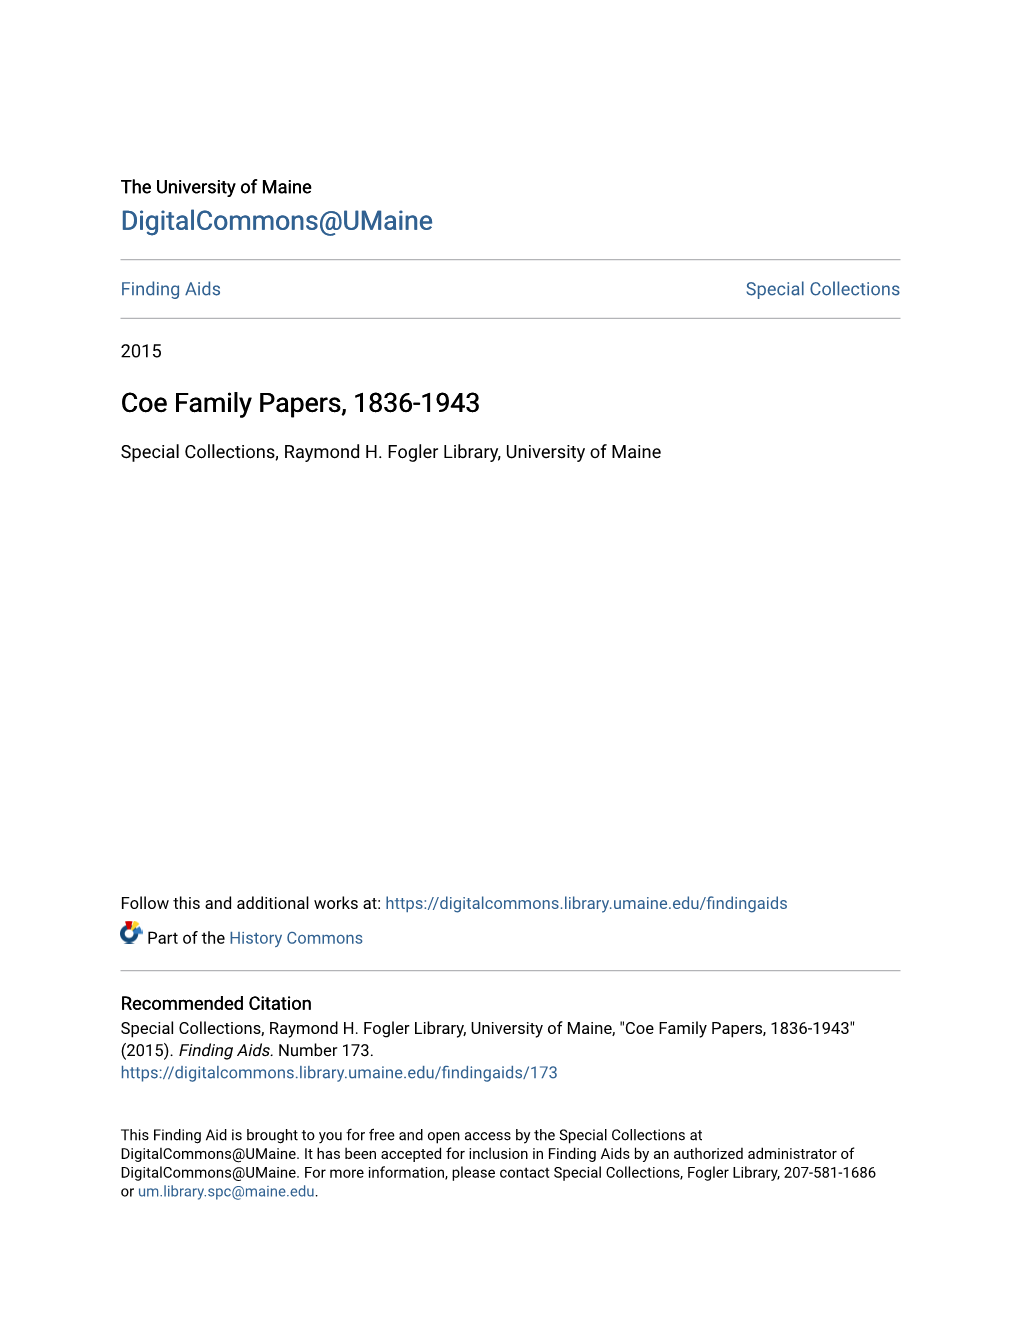 Coe Family Papers, 1836-1943